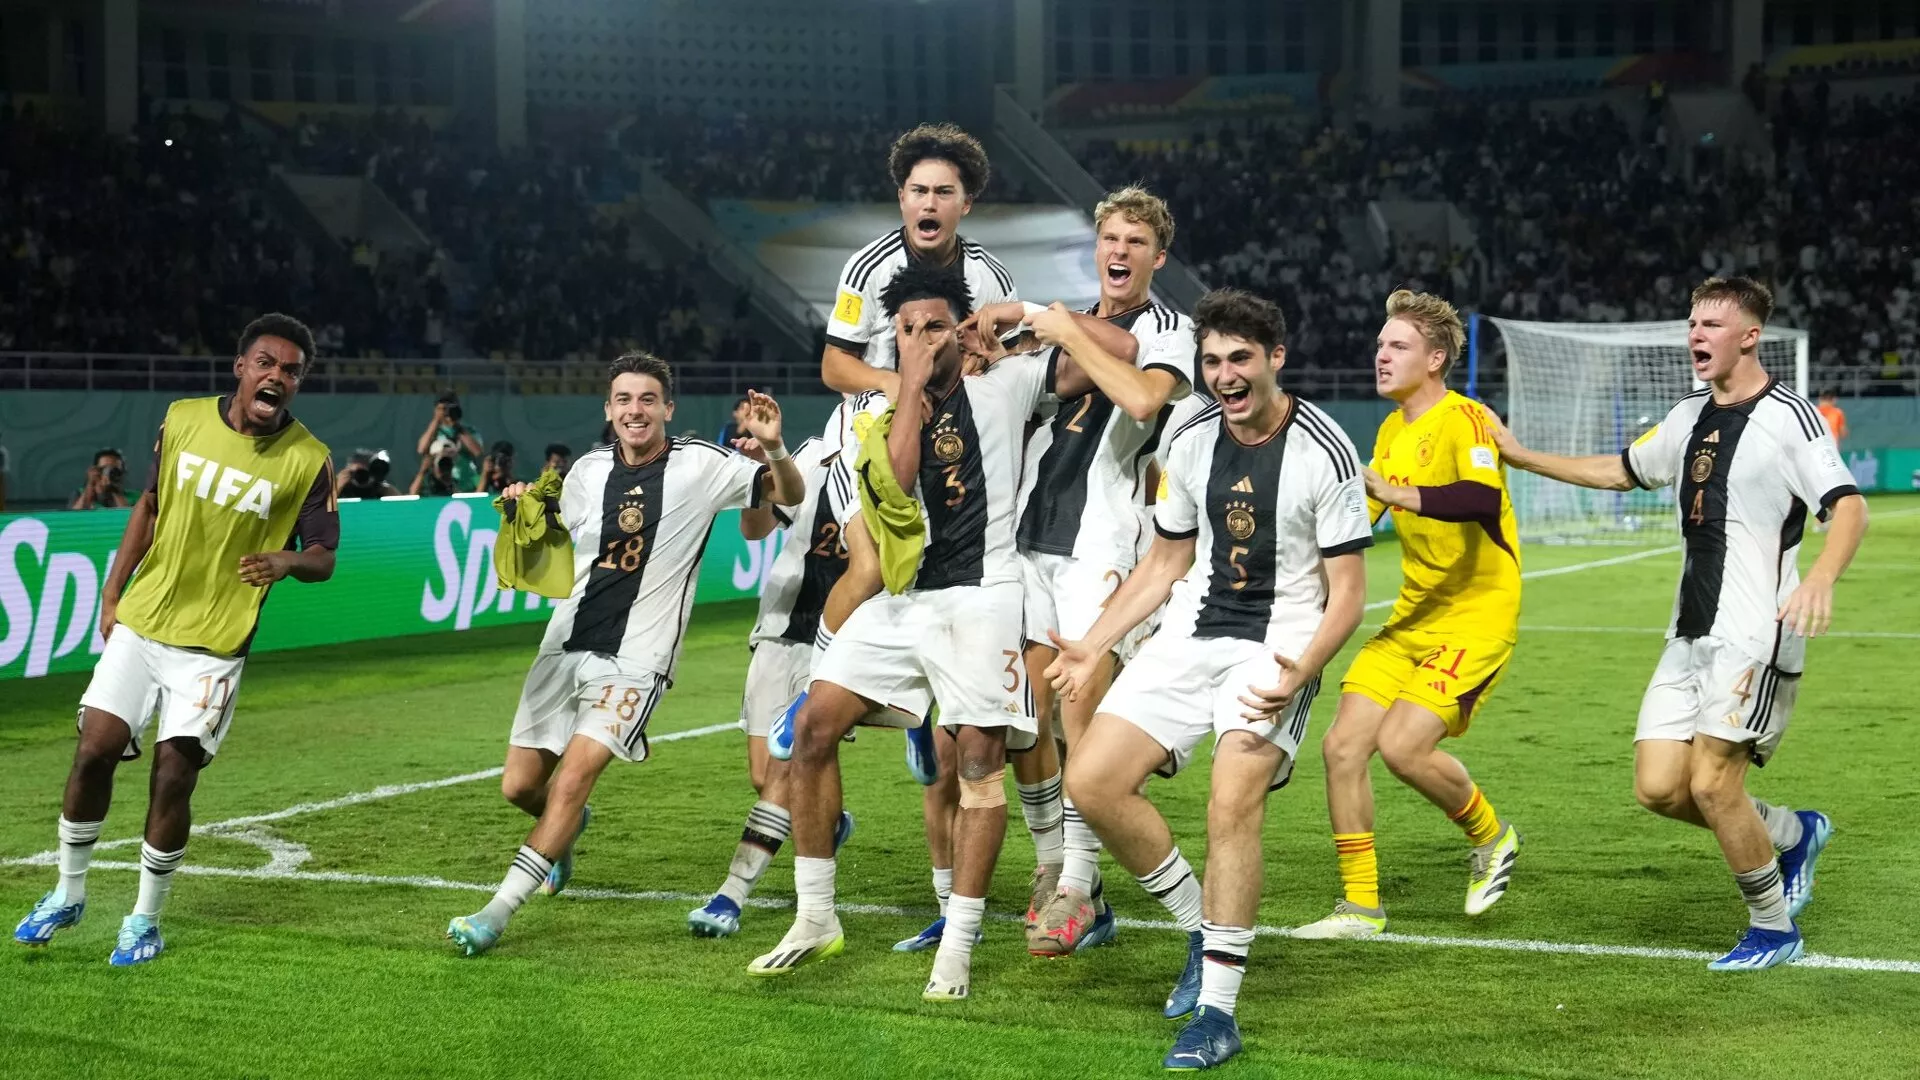 Germany clinch their first-ever FIFA U-17 World Cup title after win against France